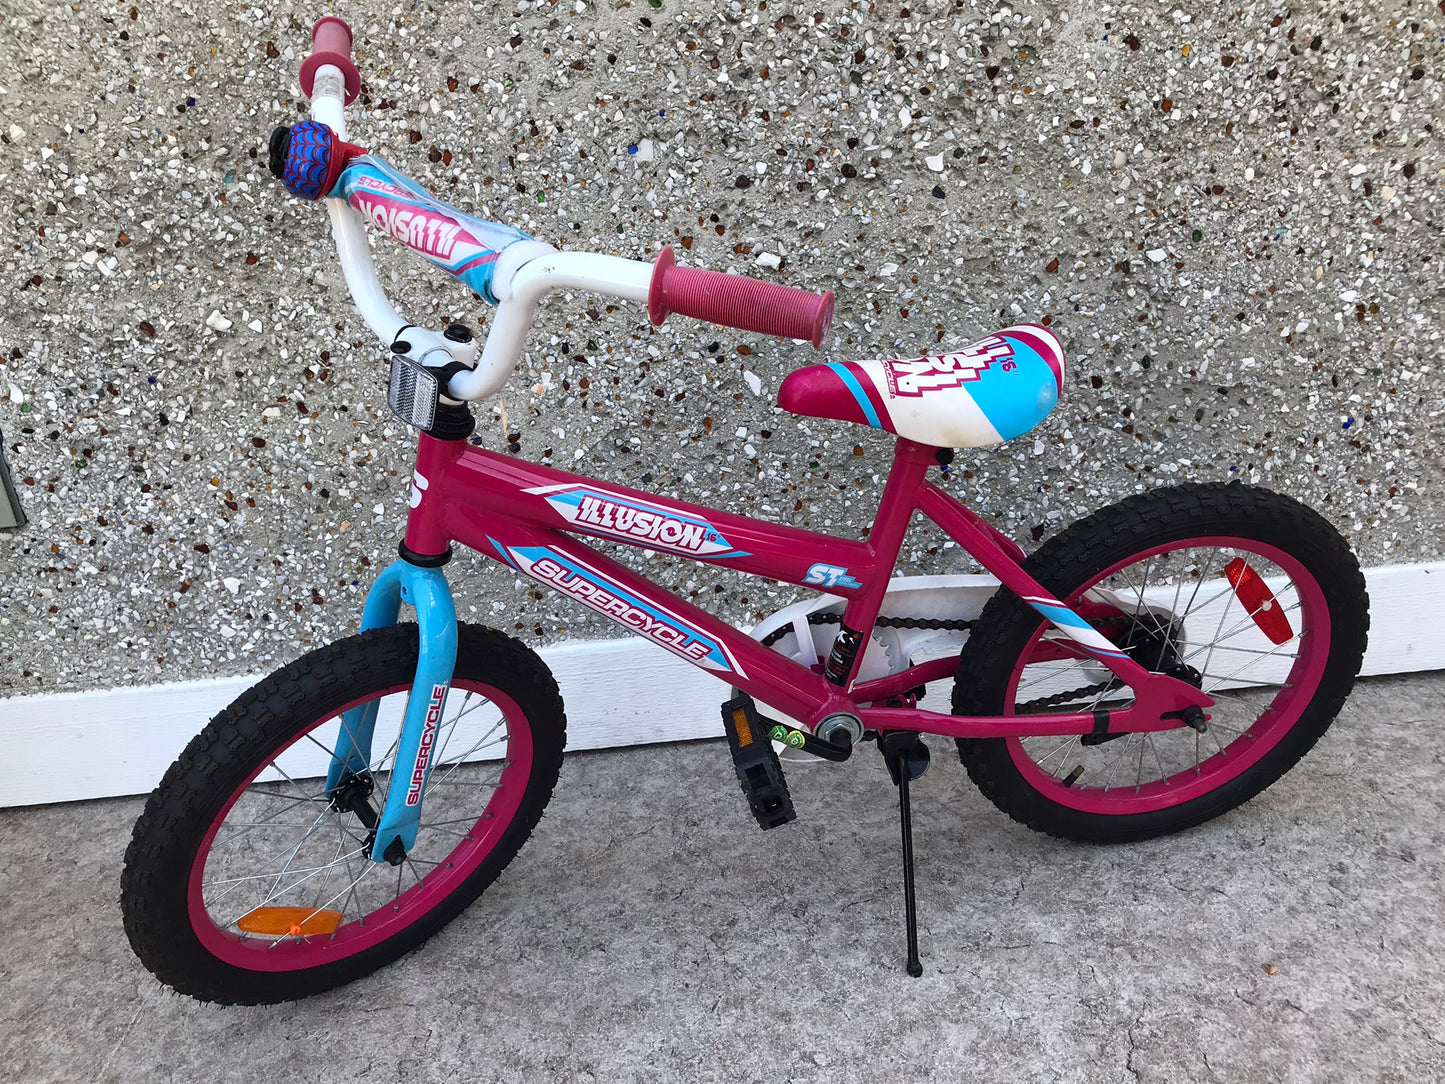 Children's Bike 16 Supercycle with Back Breaks Excellent Tires and Condition